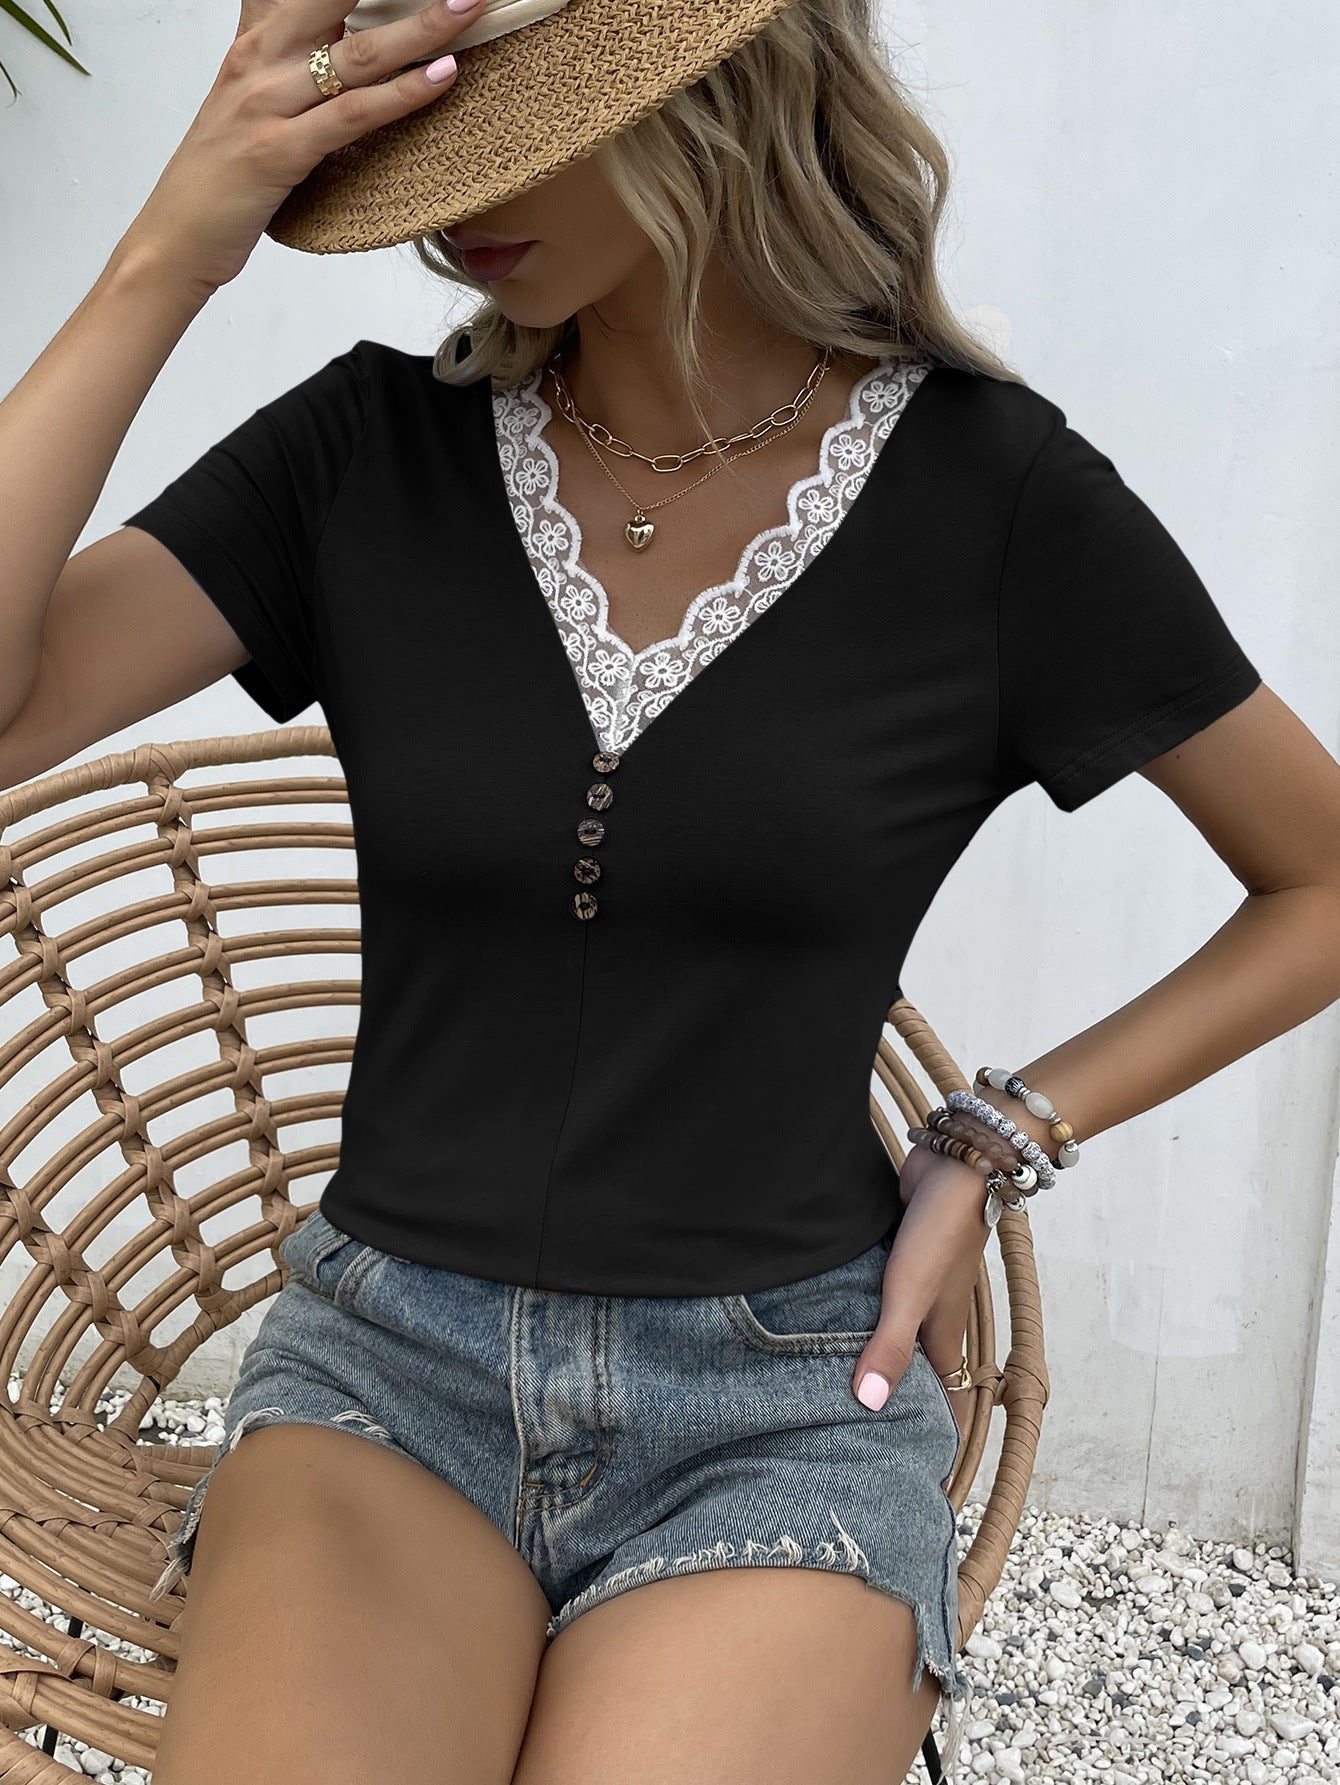 Lace Trim V-Neck Short Sleeve Blouse - Kawaii Stop - Casual Style, Chic Blouse, Comfortable Fit, Elegant Fashion, Fashionable Apparel, Lace Blouse, Lace Trimmed, Ship From Overseas, Short Sleeve, Stylish Tops, T-Shirt, T-Shirts, Tee, V-Neck Top, Versatile Wear, Women's Clothing, Women's Top, Y&BL